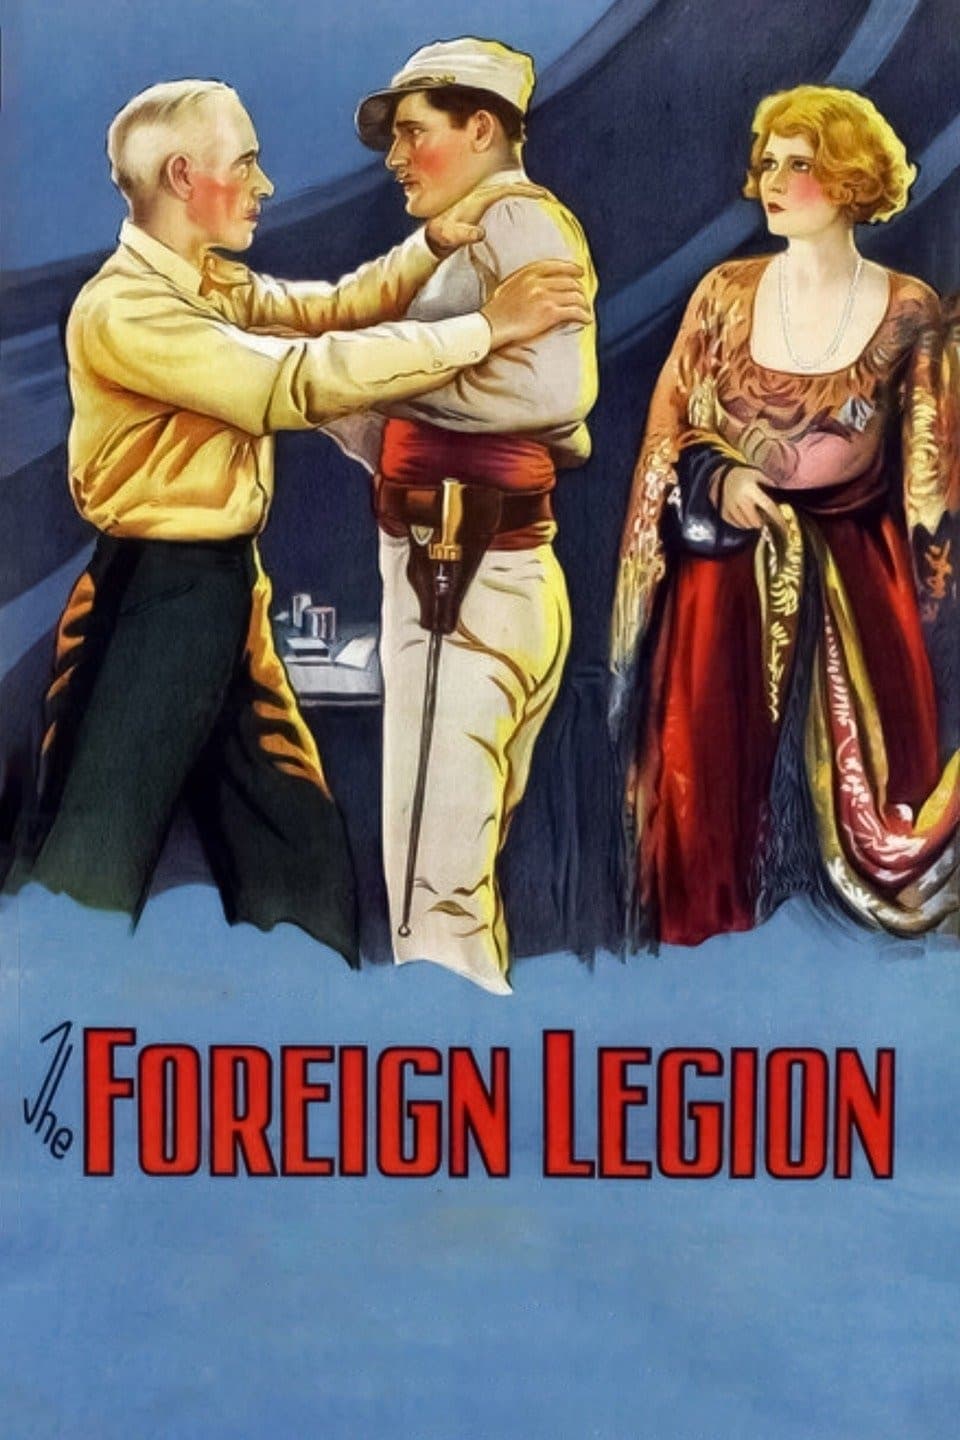 The Foreign Legion (1928)